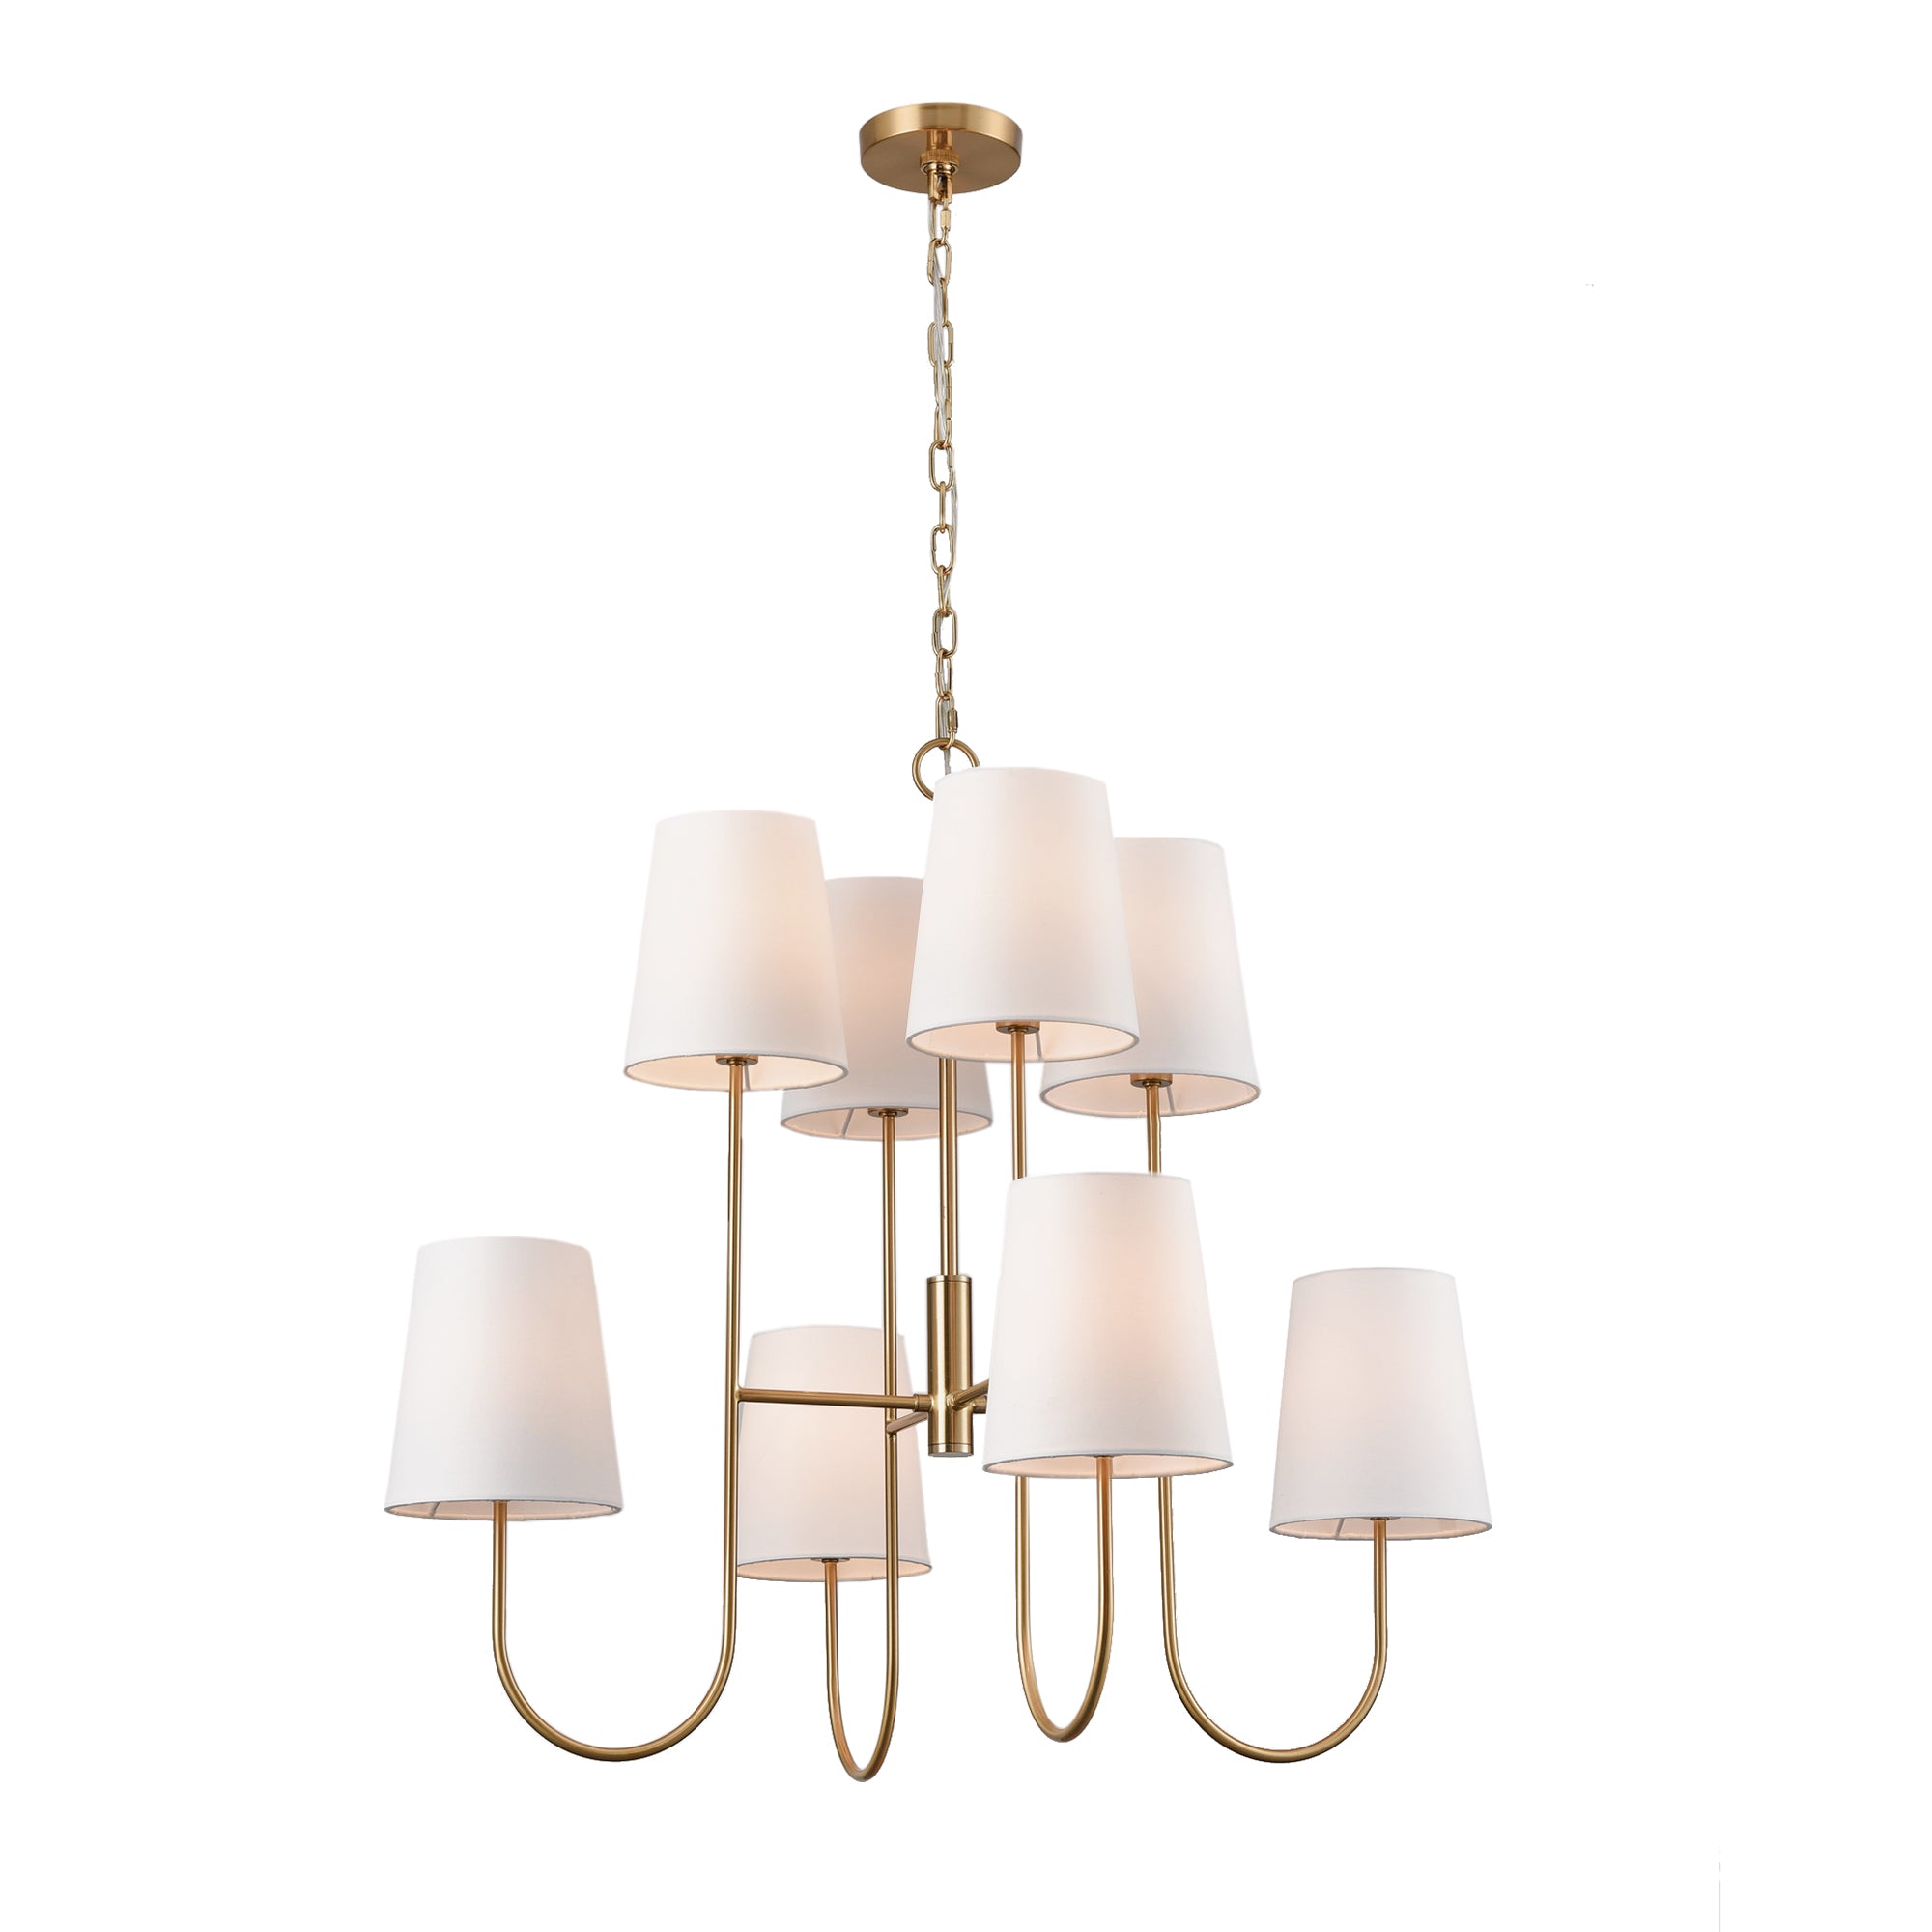 The Kinley Chandelier is a fresh take on a classic two-tiered shape. Subtle modern touches like the tapered shade and gold finish complete the look. Amethyst Home provides interior design, new construction, custom furniture, and area rugs in the Calabasas metro area.